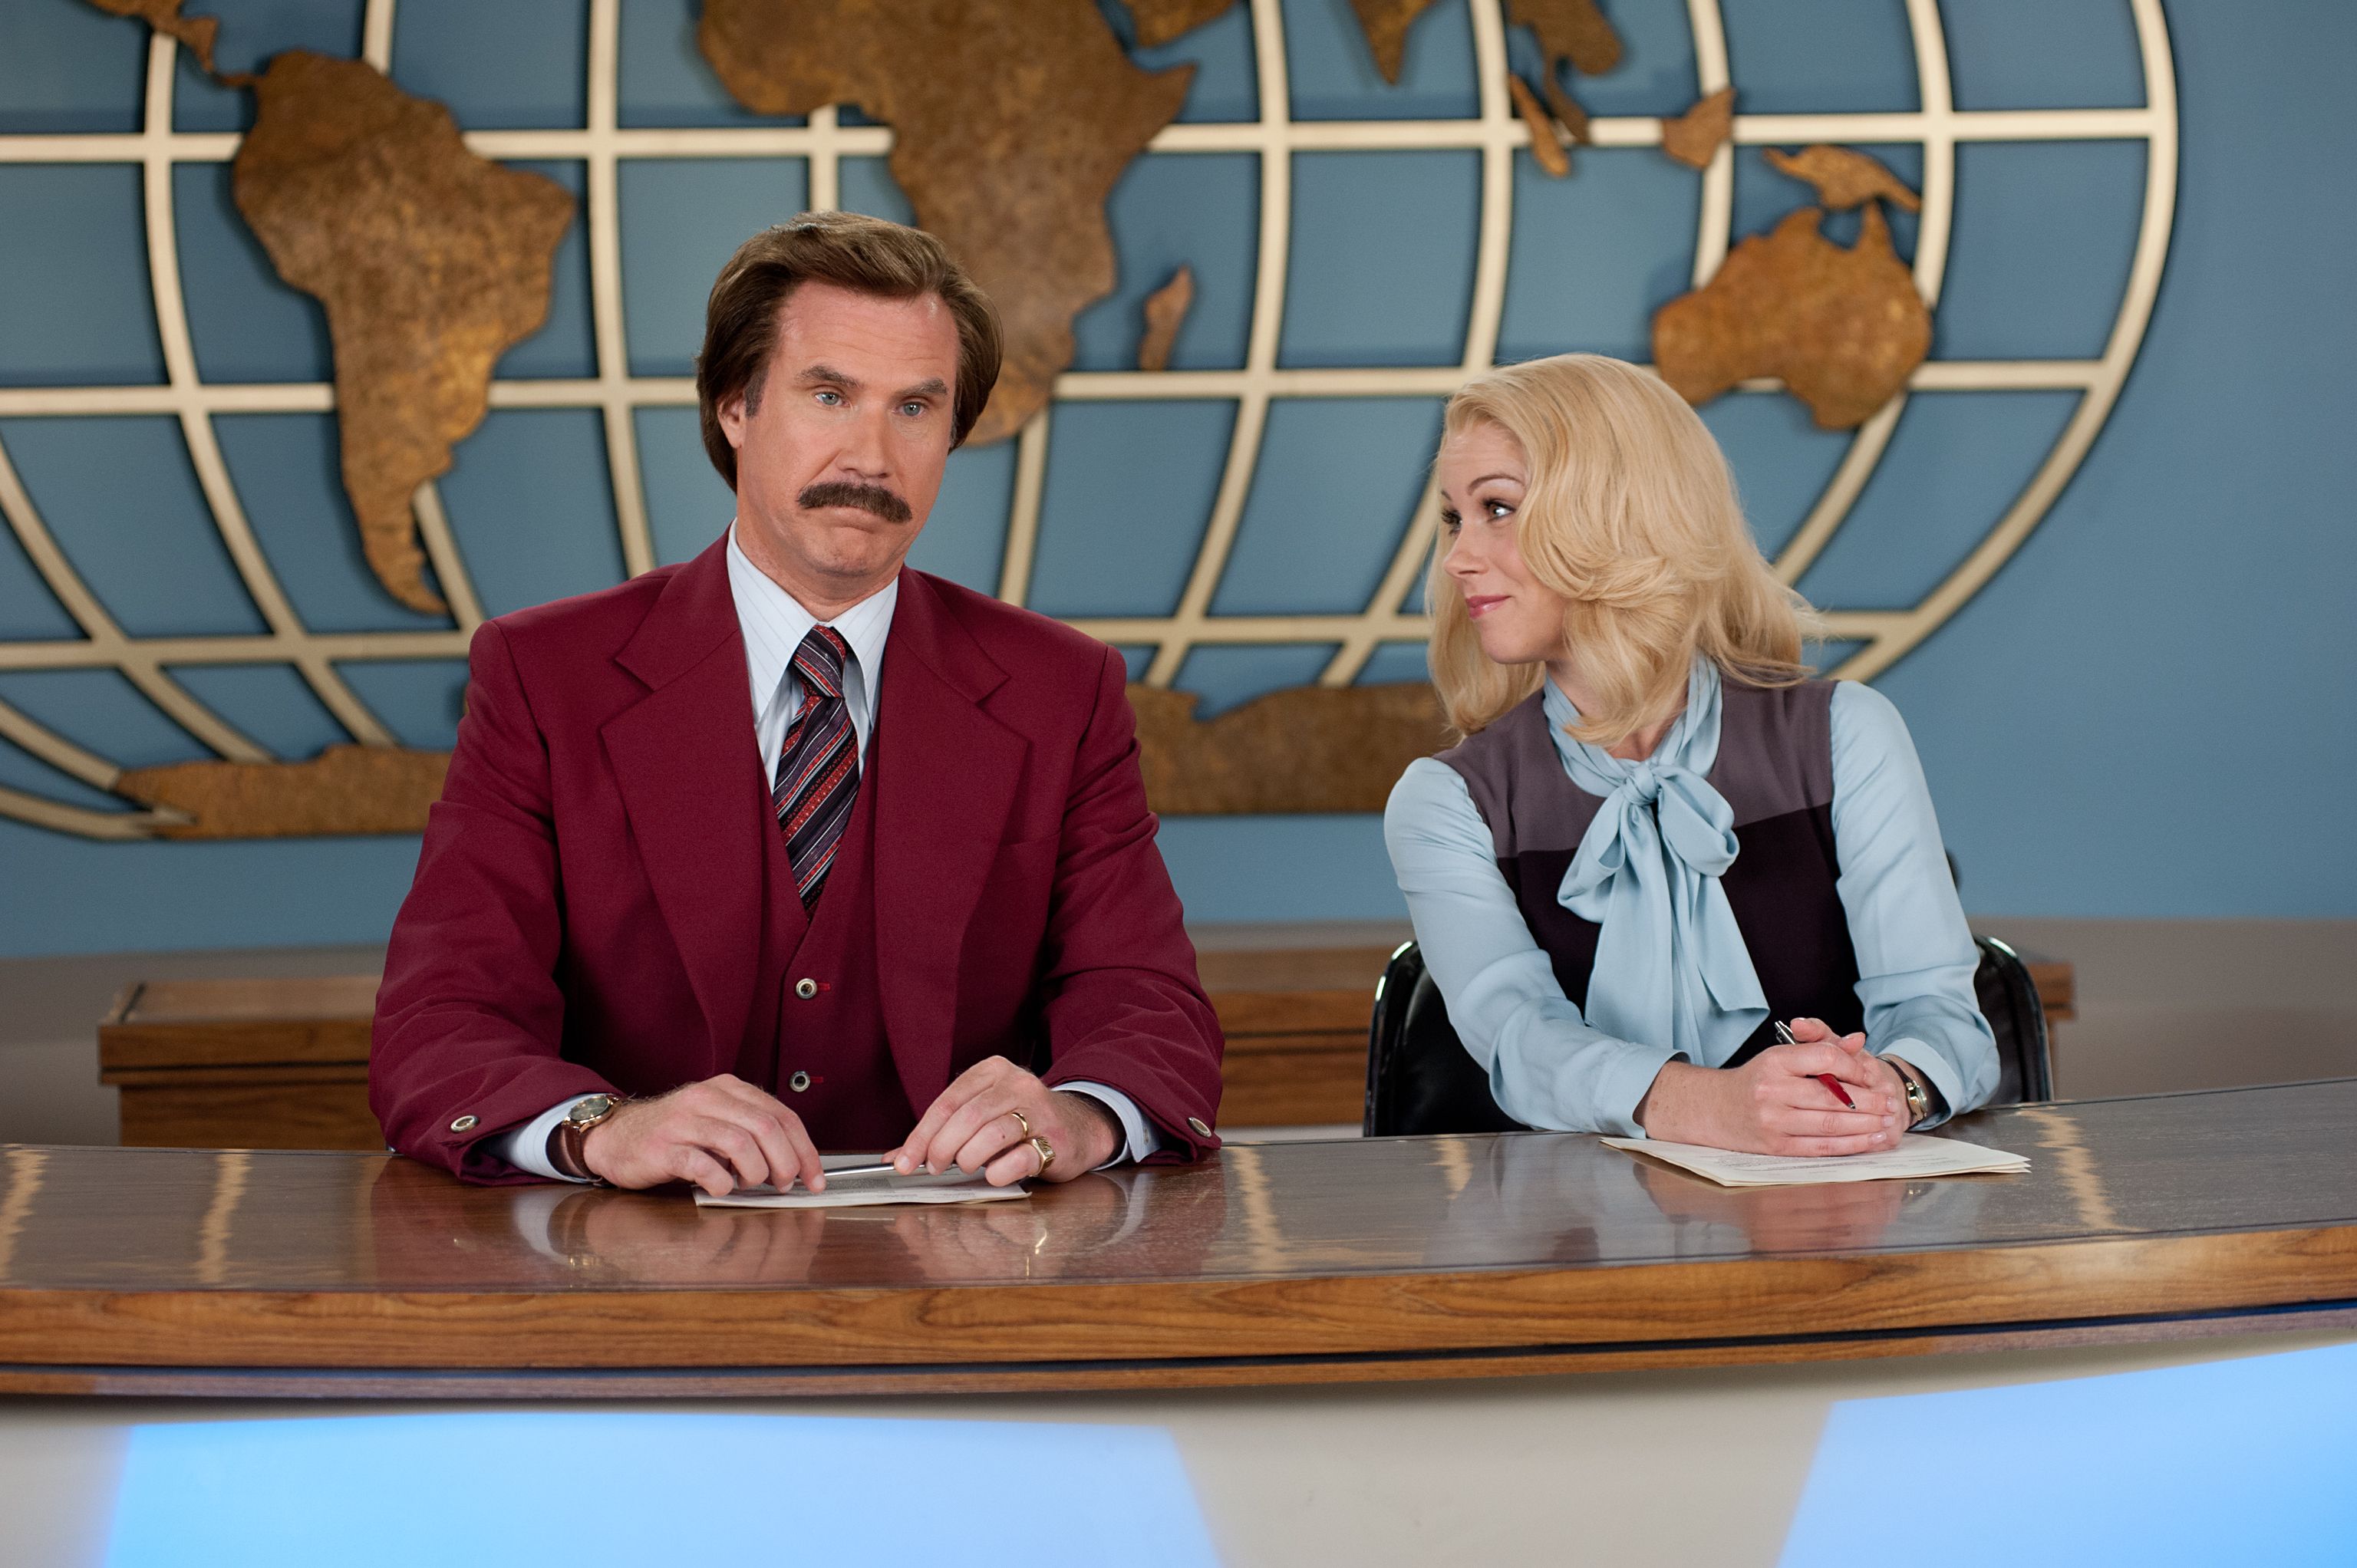 Anchorman: The Legend Continues Photo 2